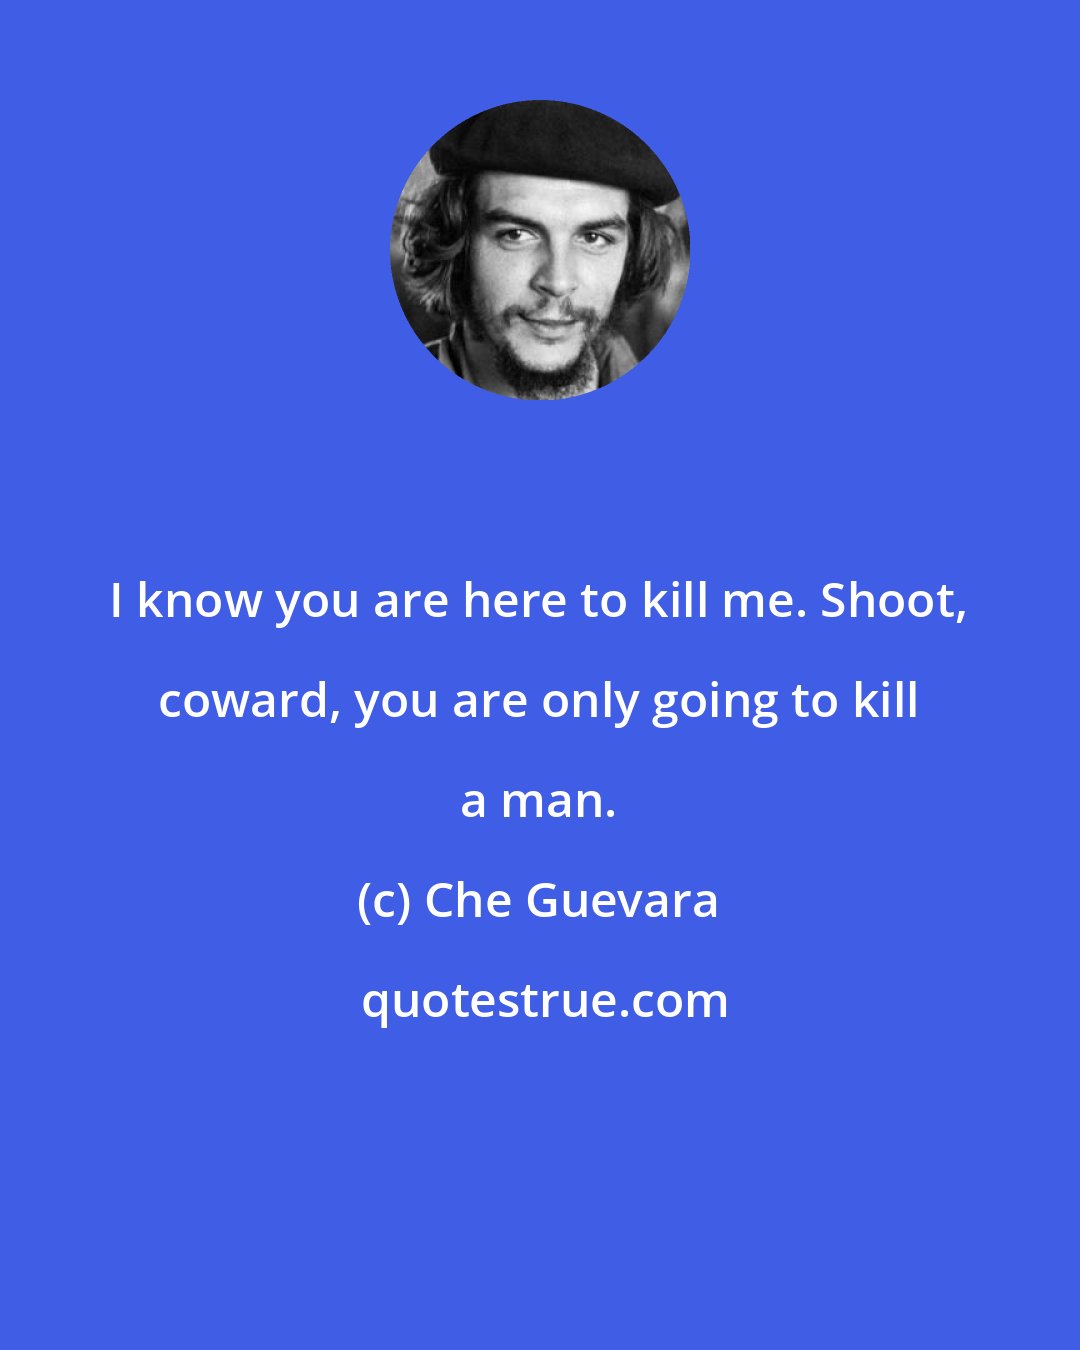 Che Guevara: I know you are here to kill me. Shoot, coward, you are only going to kill a man.